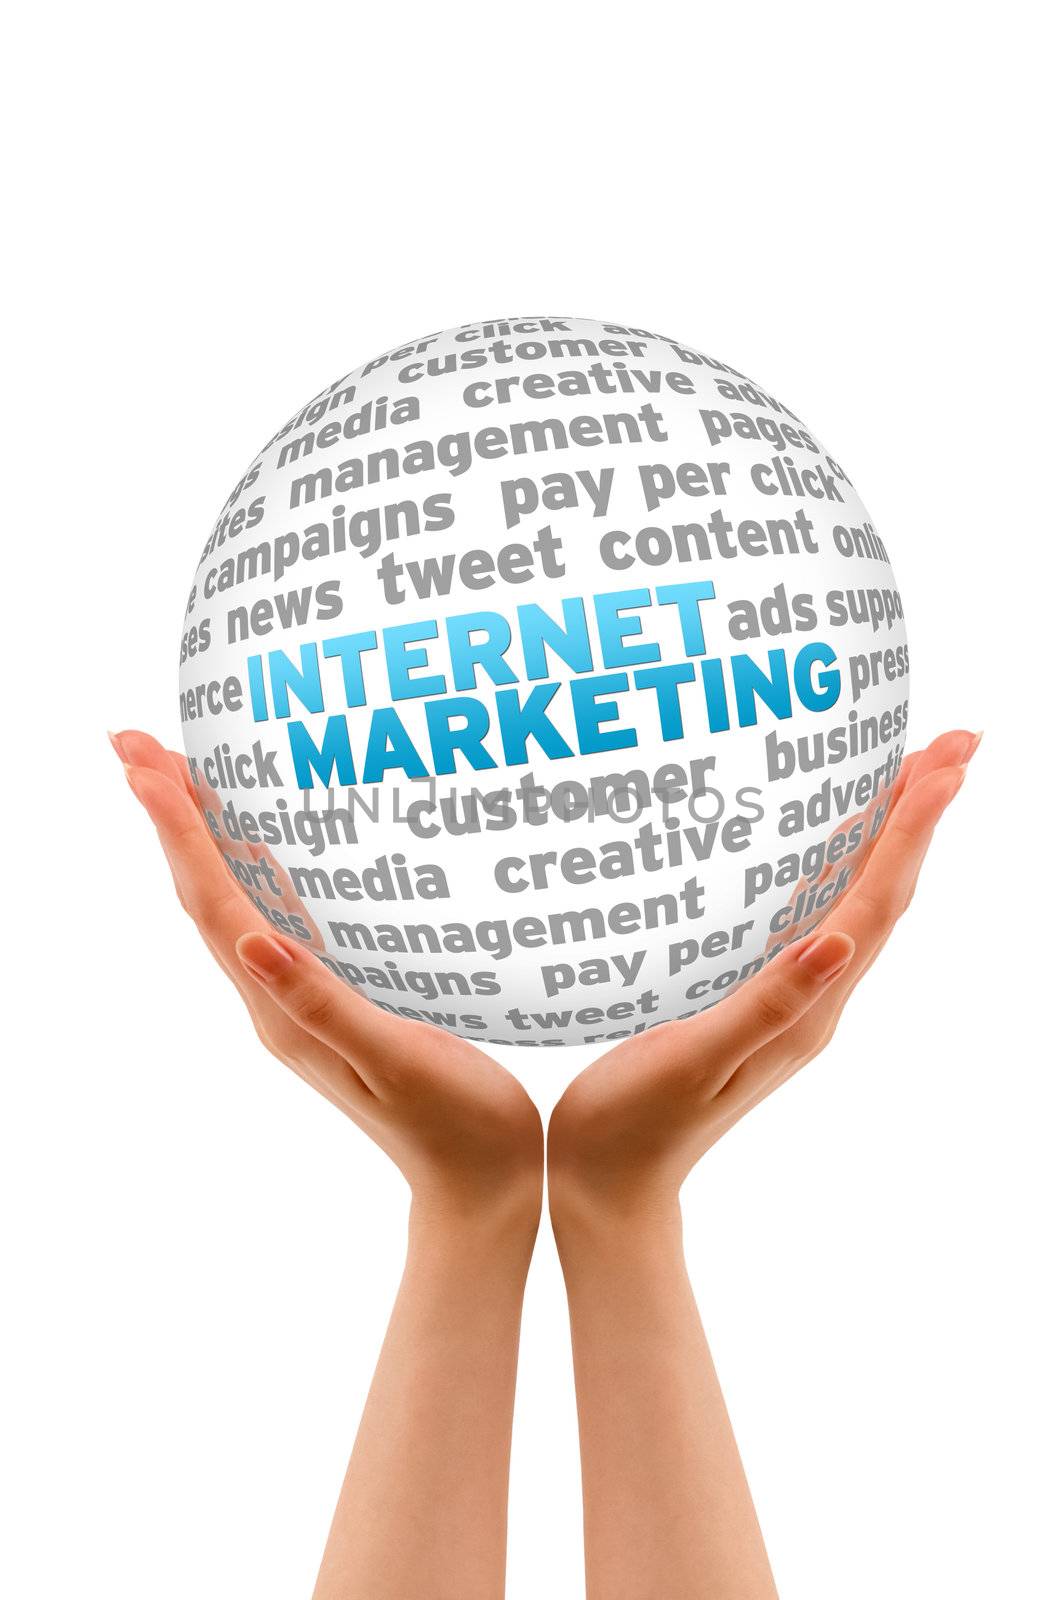 Hands holding a Internet Marketing  Sphere on white background.